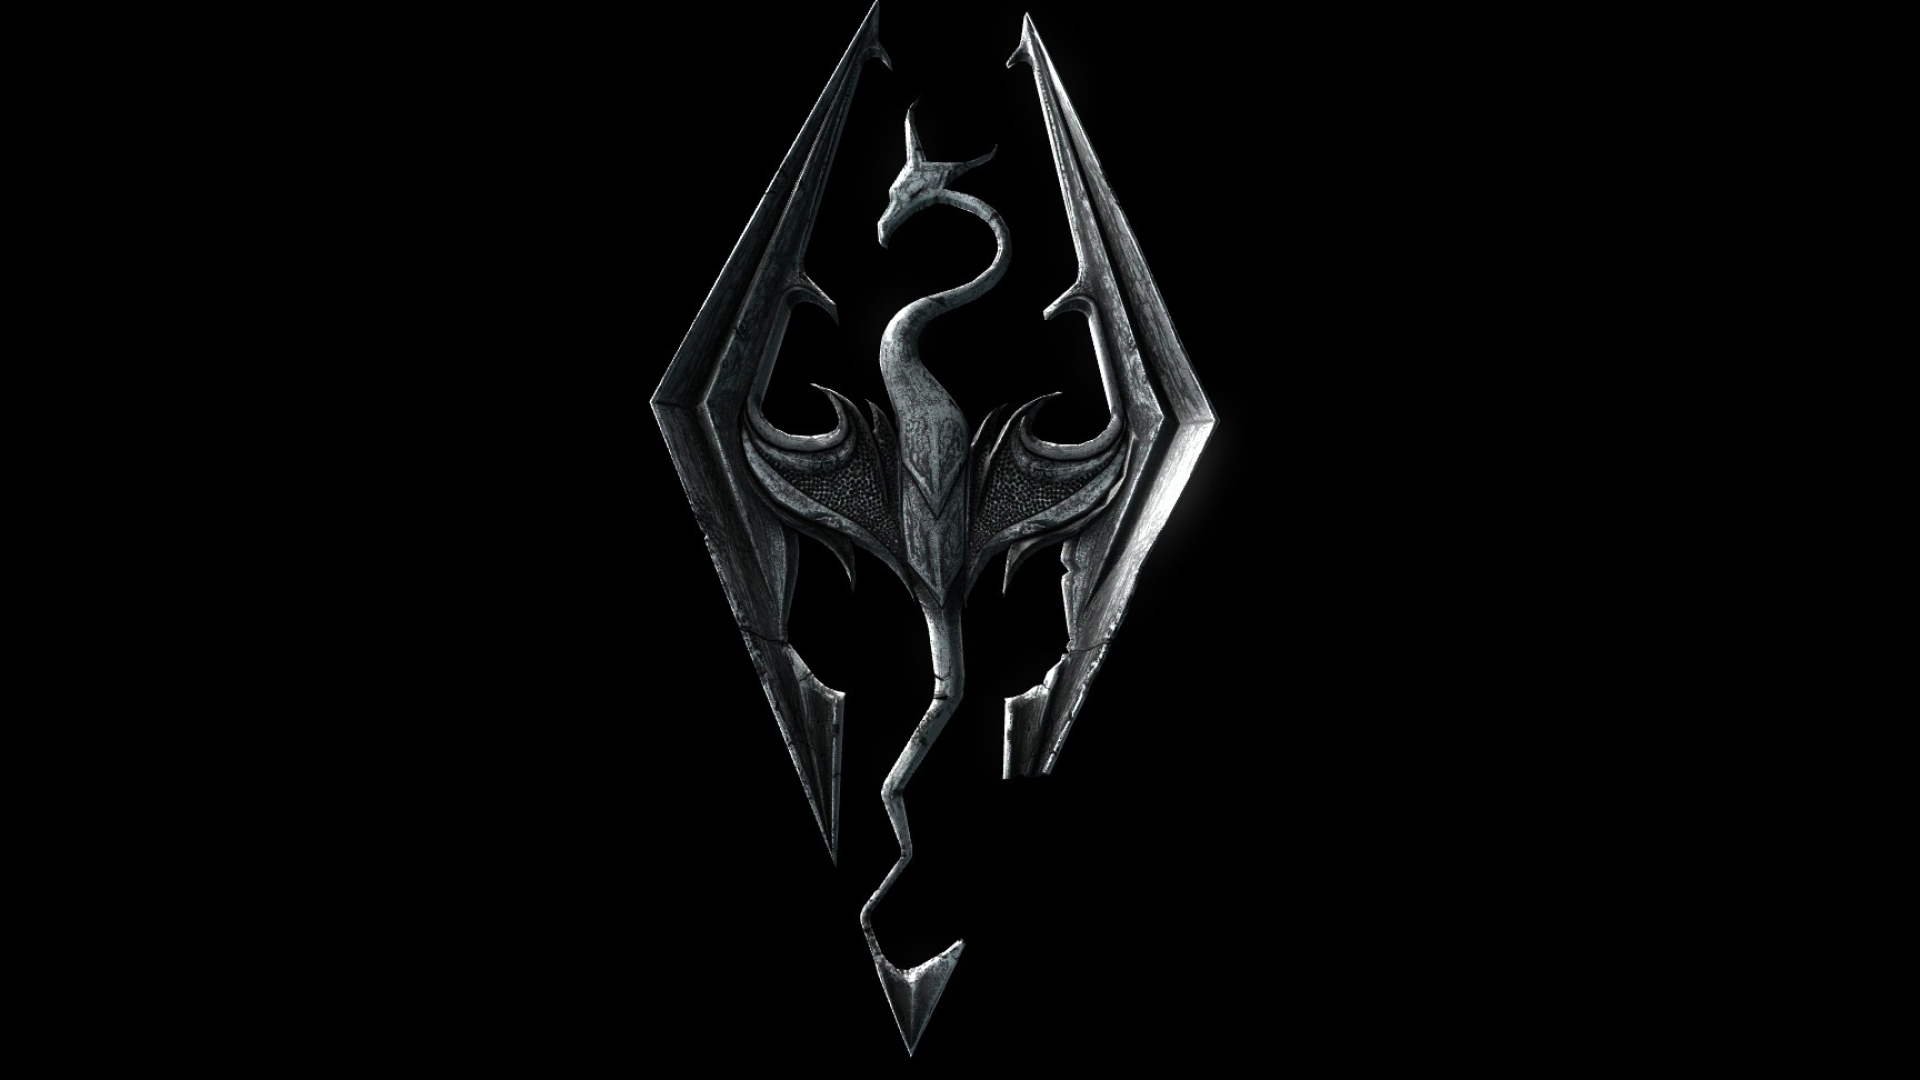 1920x1080 Skyrim Logo Wallpaper posted by Zoey Simps